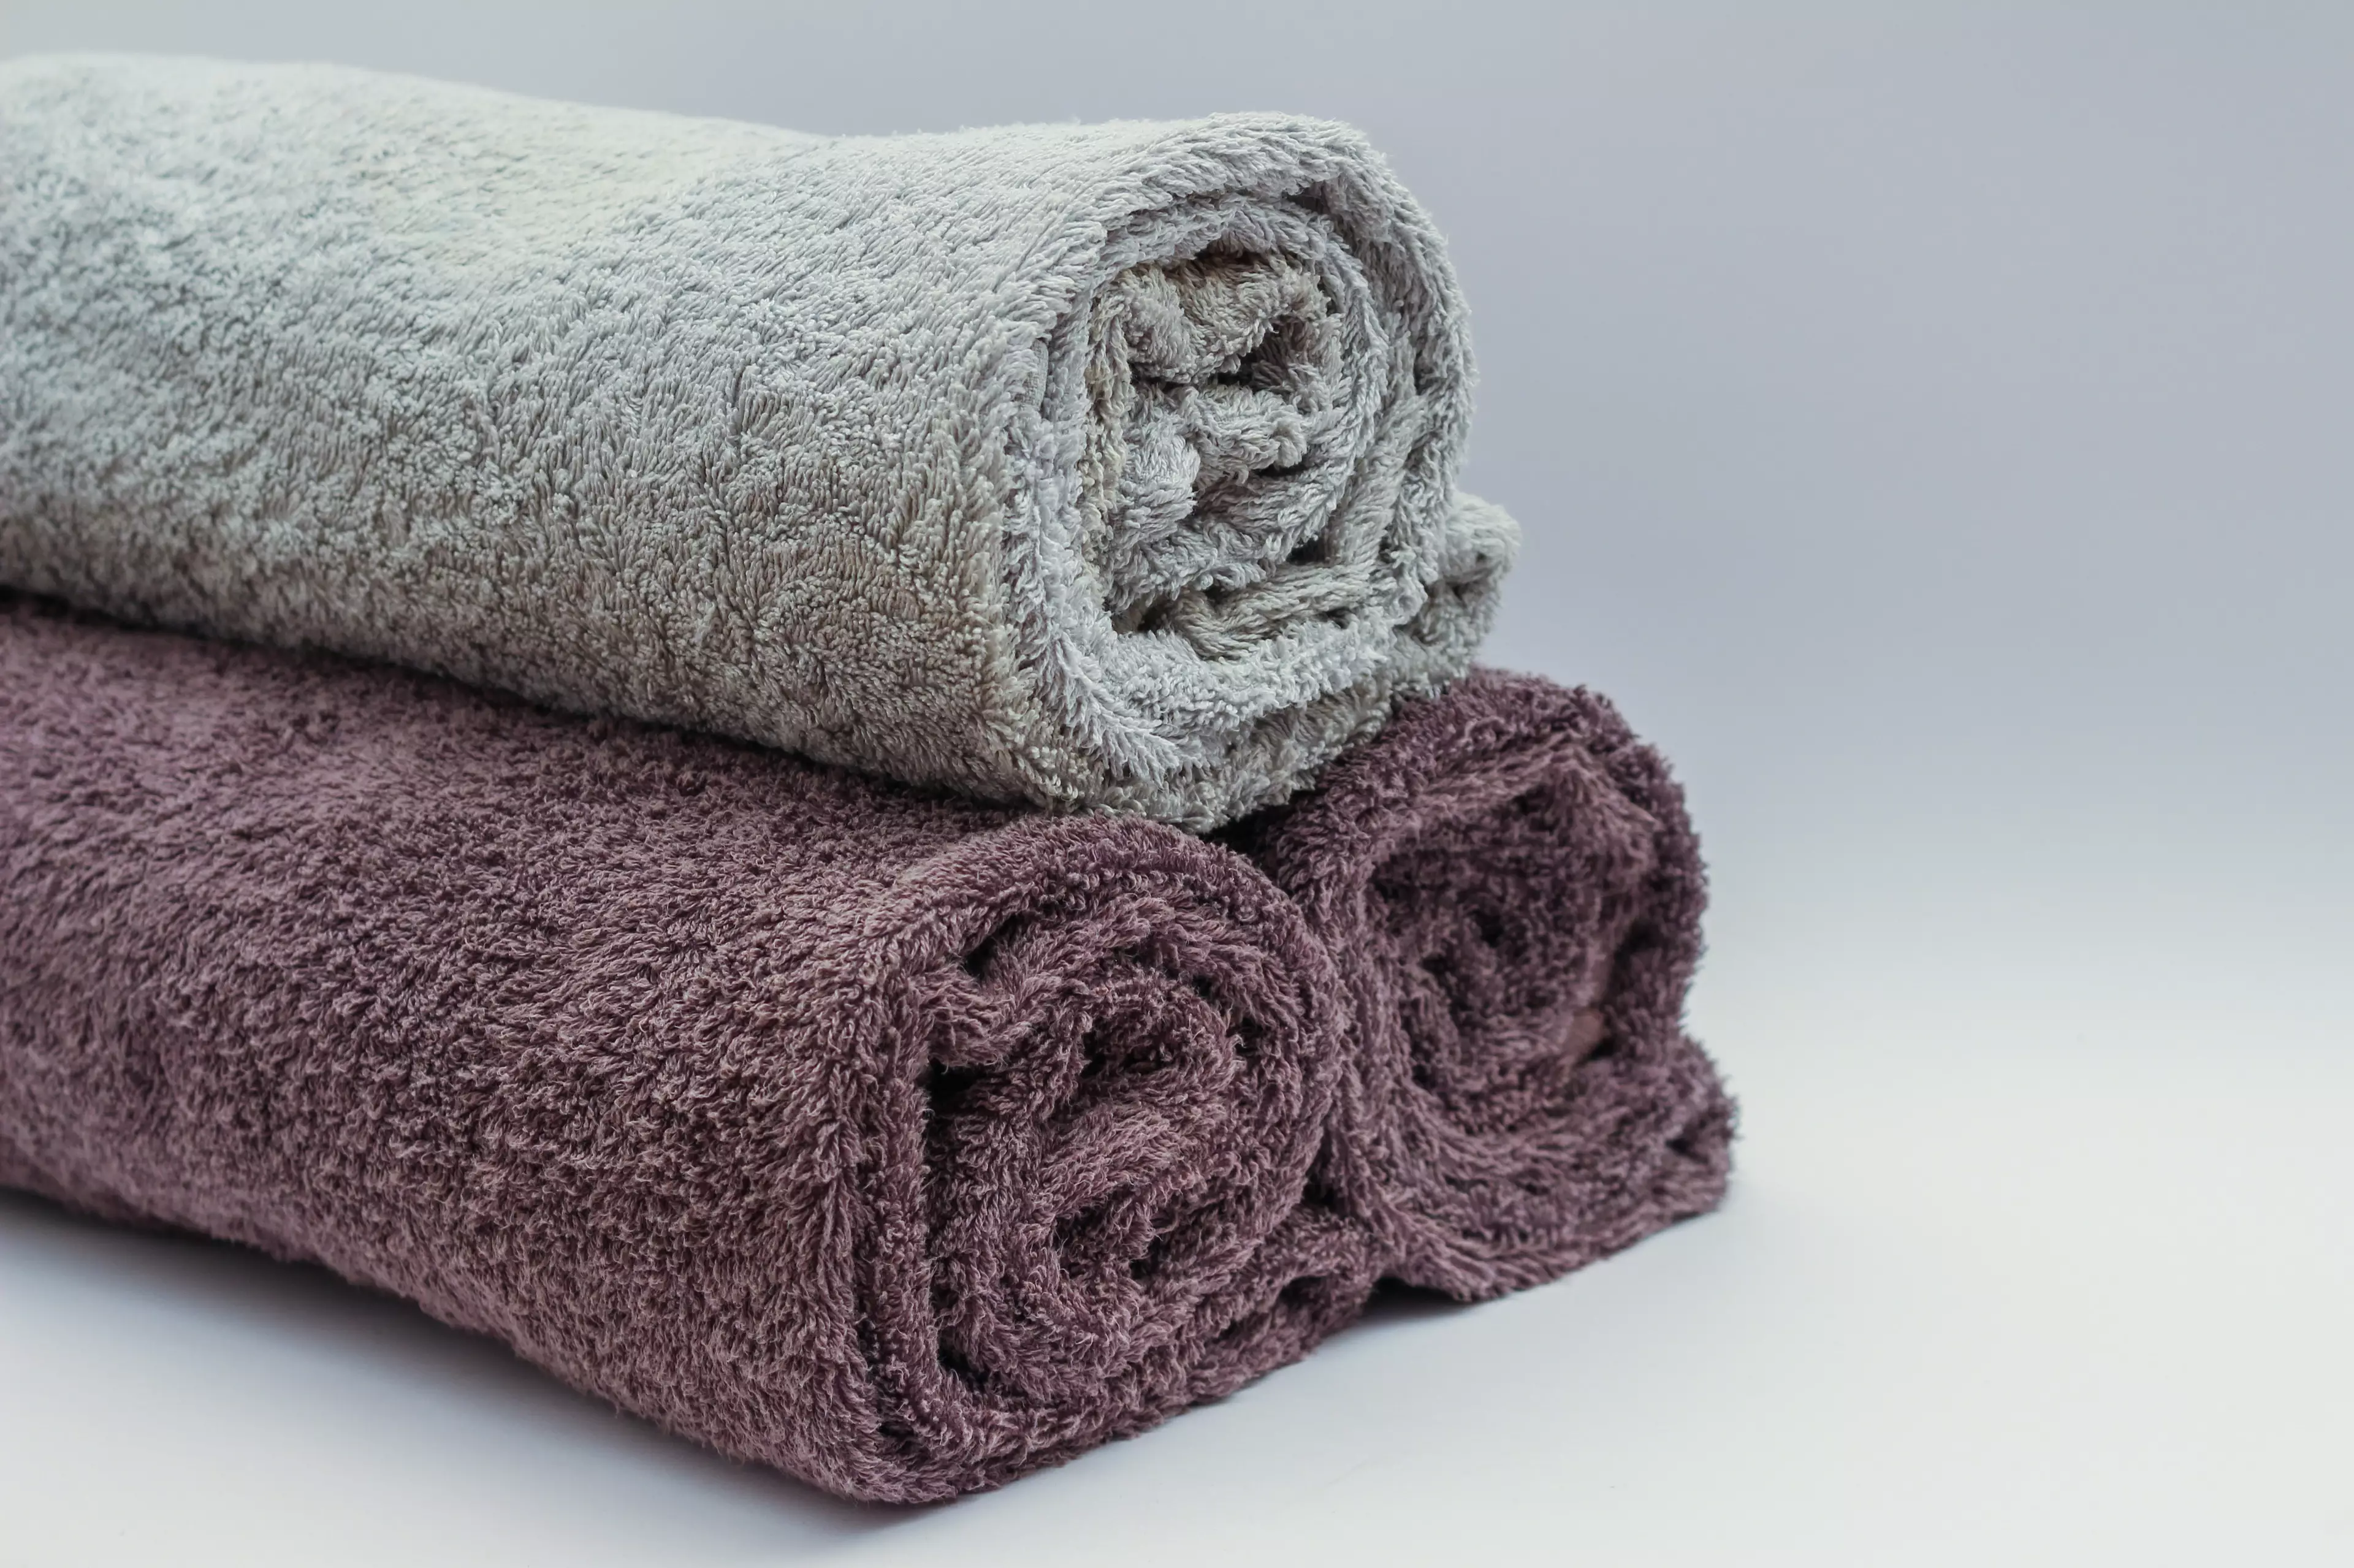 Looking for more laundry hacks? Towel designer and expert Lucy Ackroyd recently revealed the best way to wash towels (